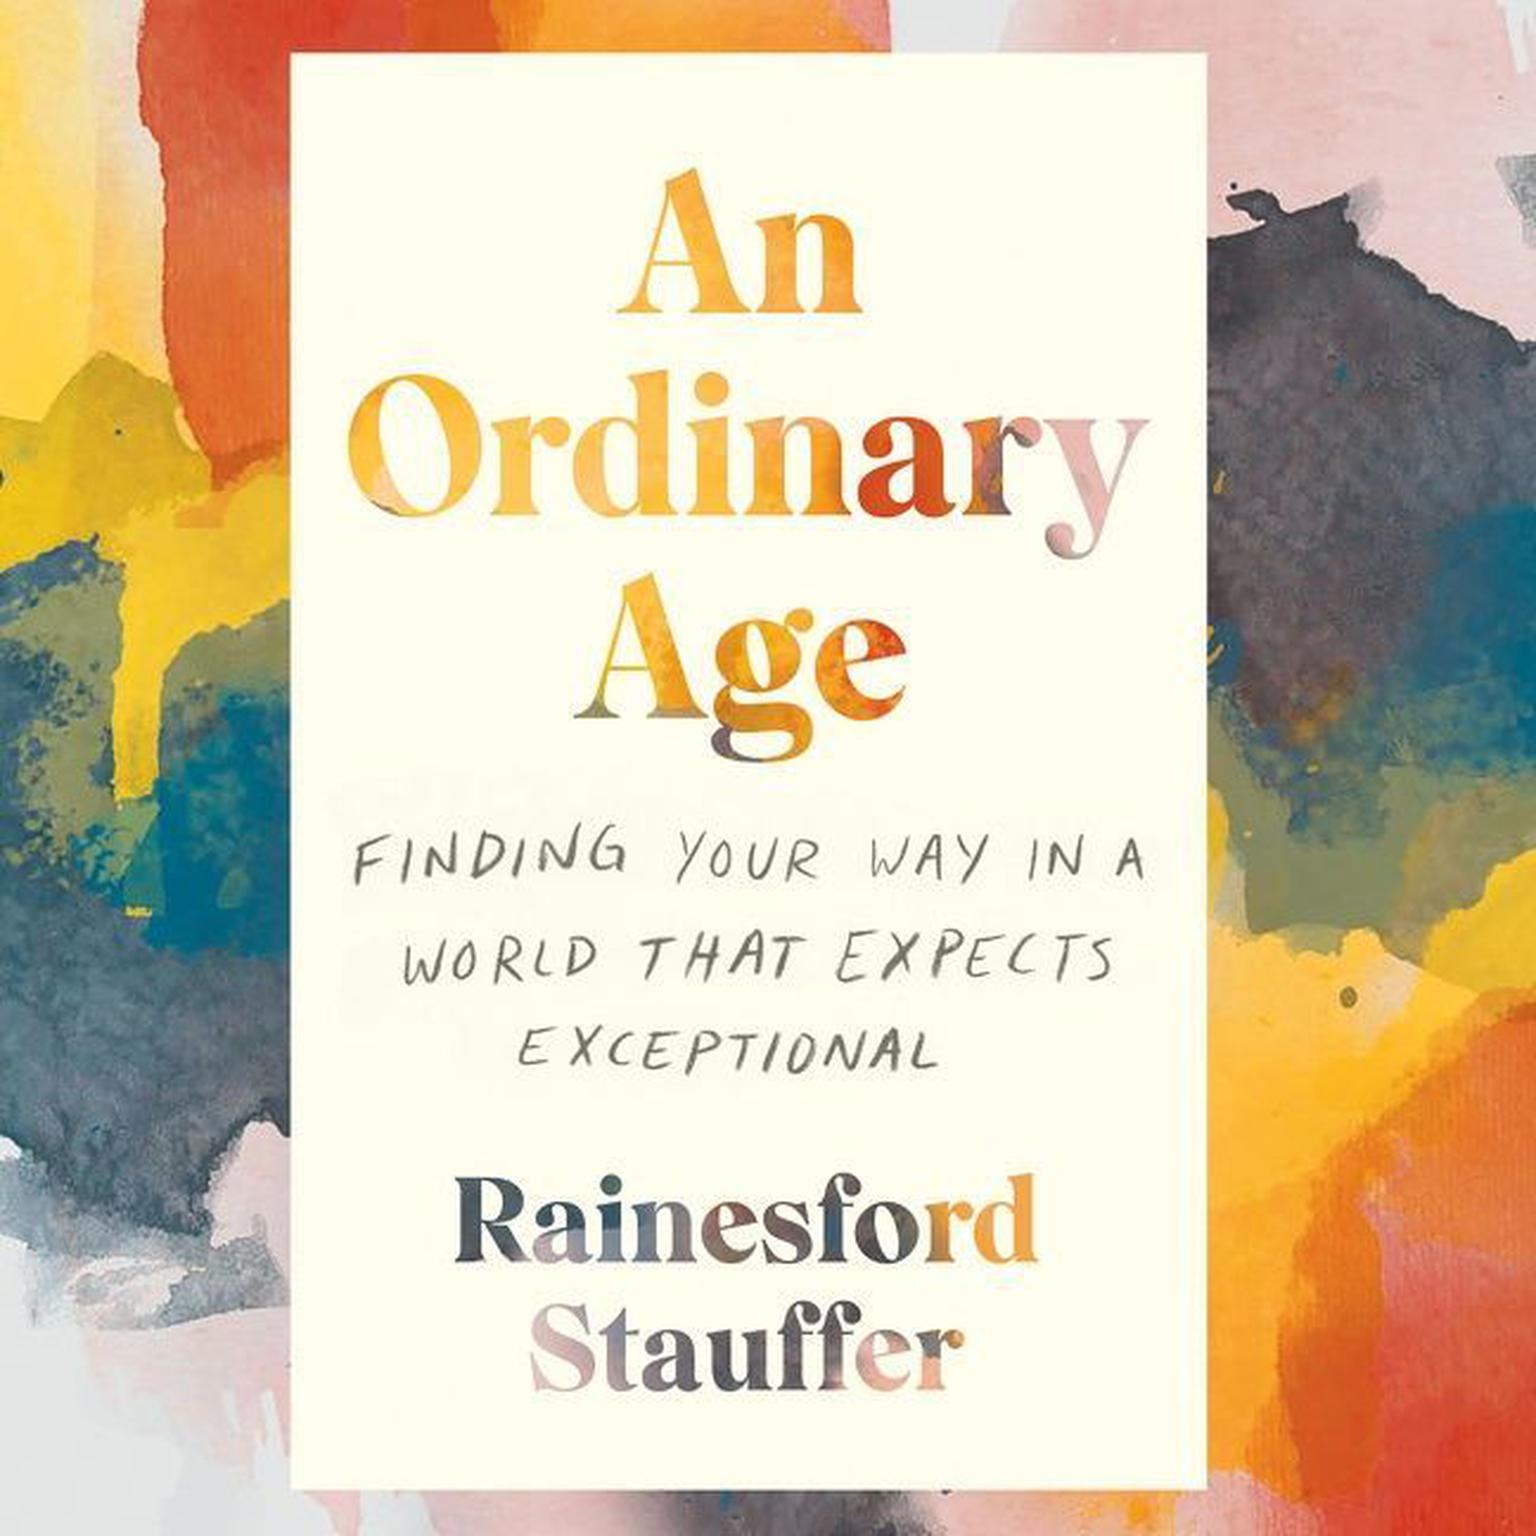 An Ordinary Age: Finding Your Way in a World That Expects Exceptional Audiobook, by Rainesford Stauffer